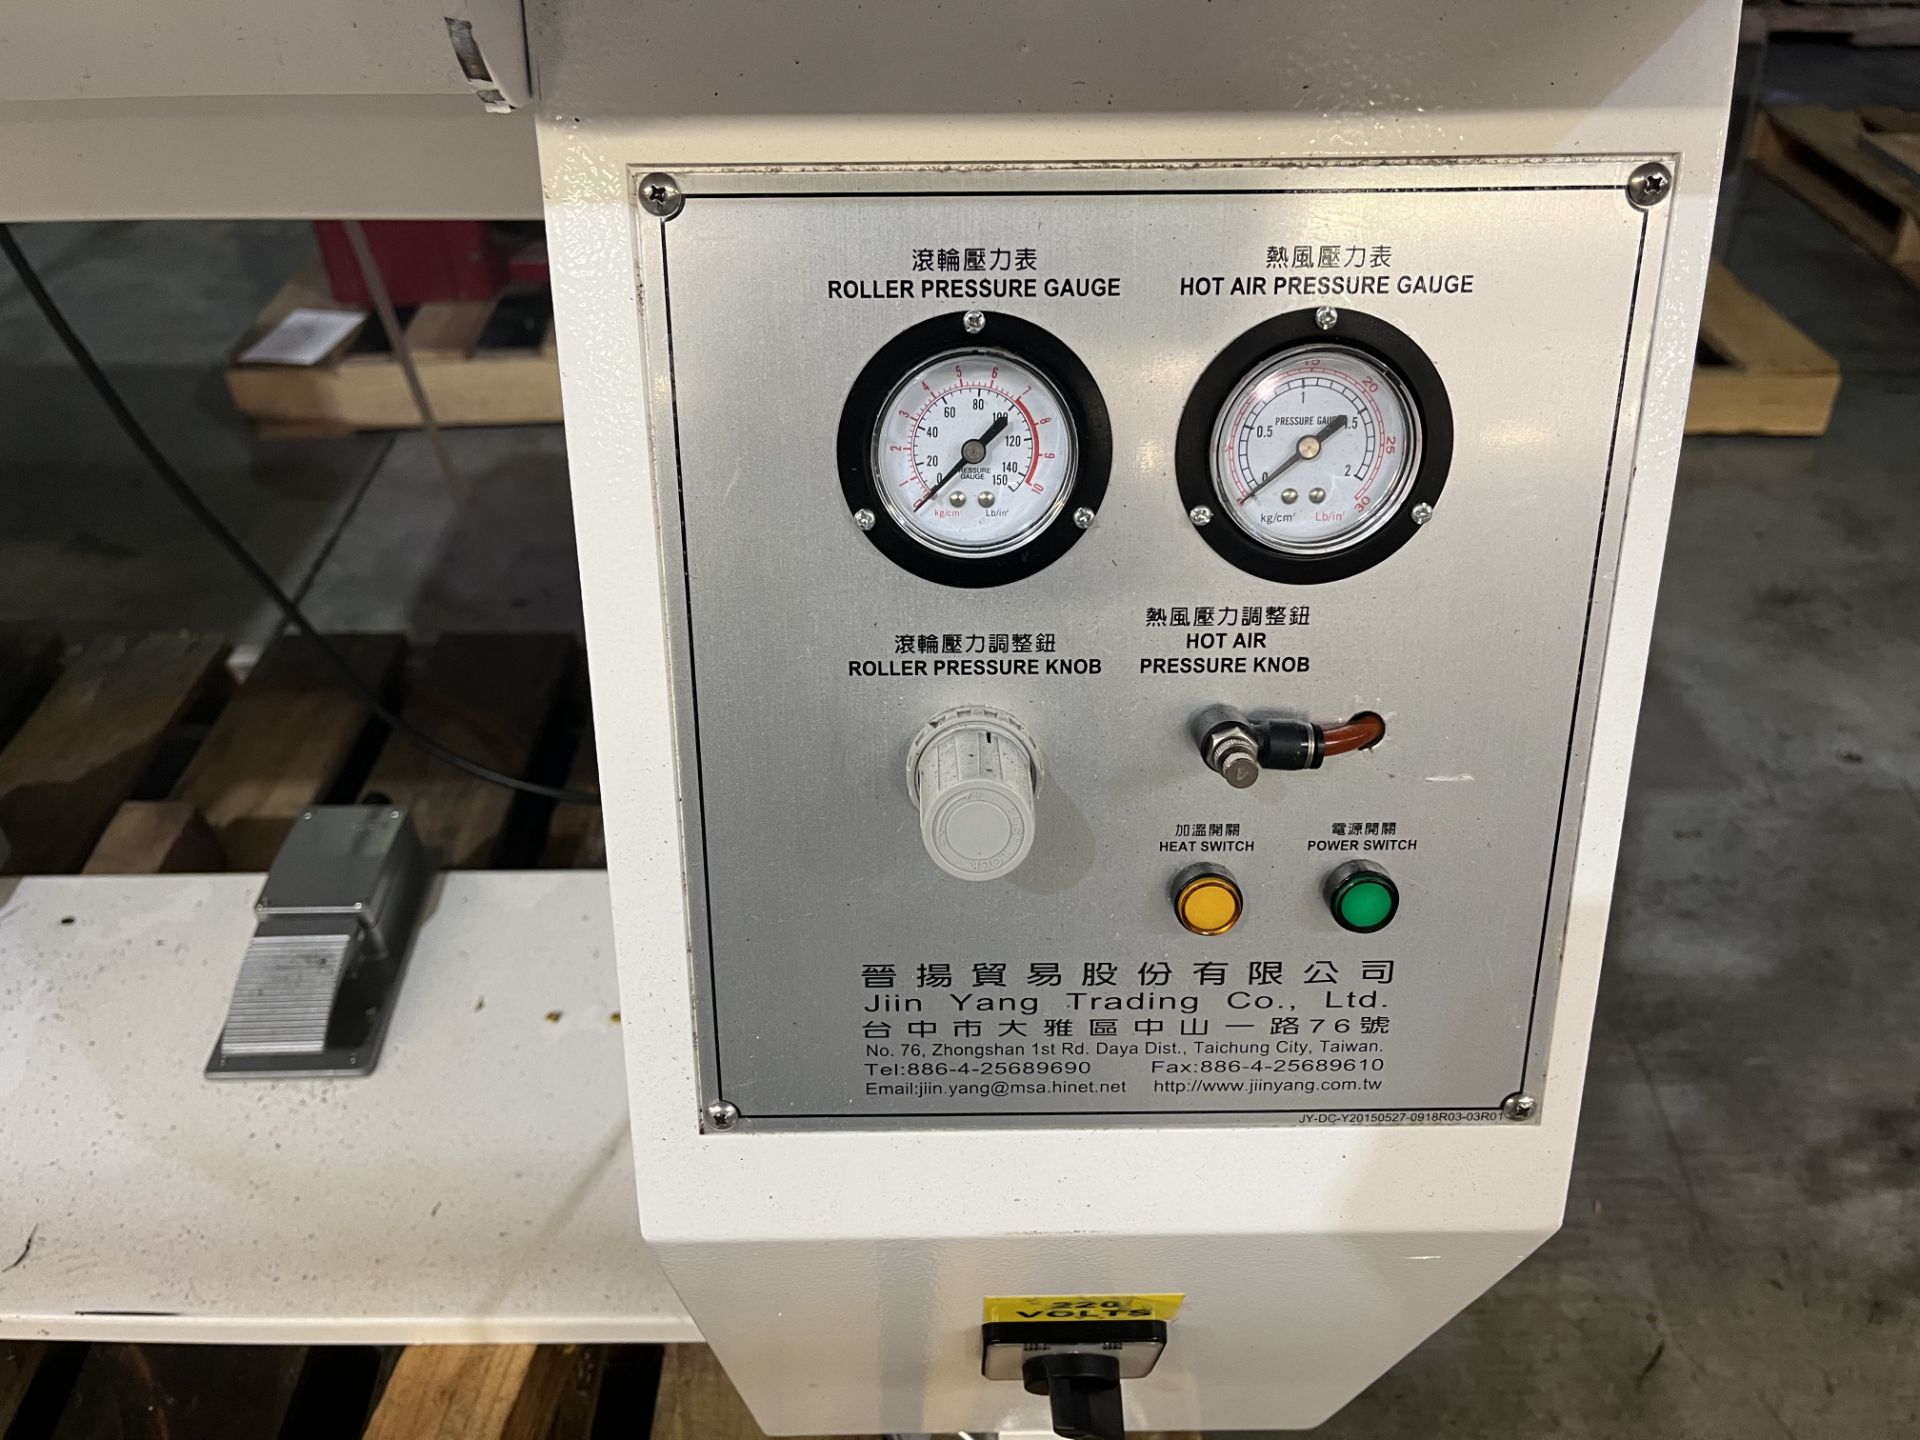 JIIN Yang Model HA 850TR Seam Sealing 220 Volt Single Phase Machine in Good, Working Condition S/N - Image 6 of 8